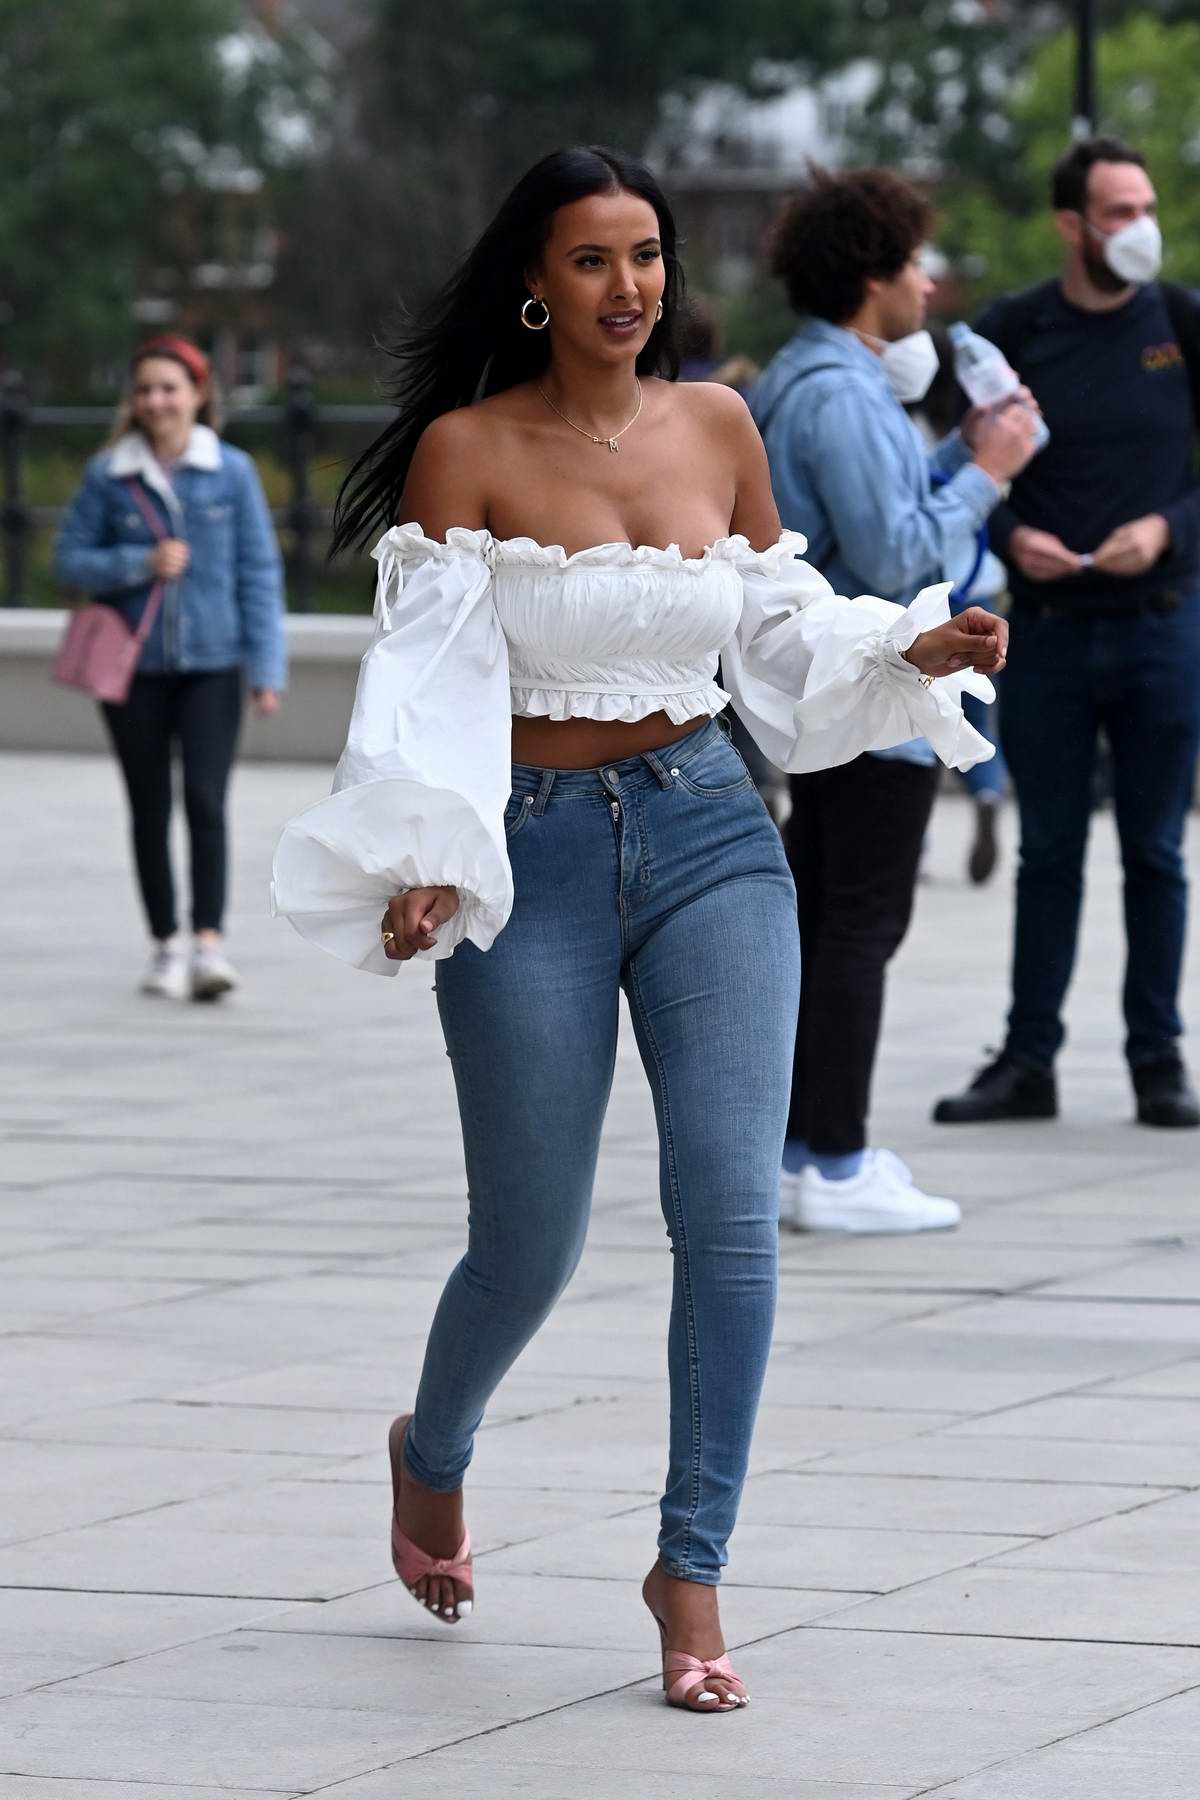 Maya Jama looks stunning in a white crop top and tight jeans as she leaves  London